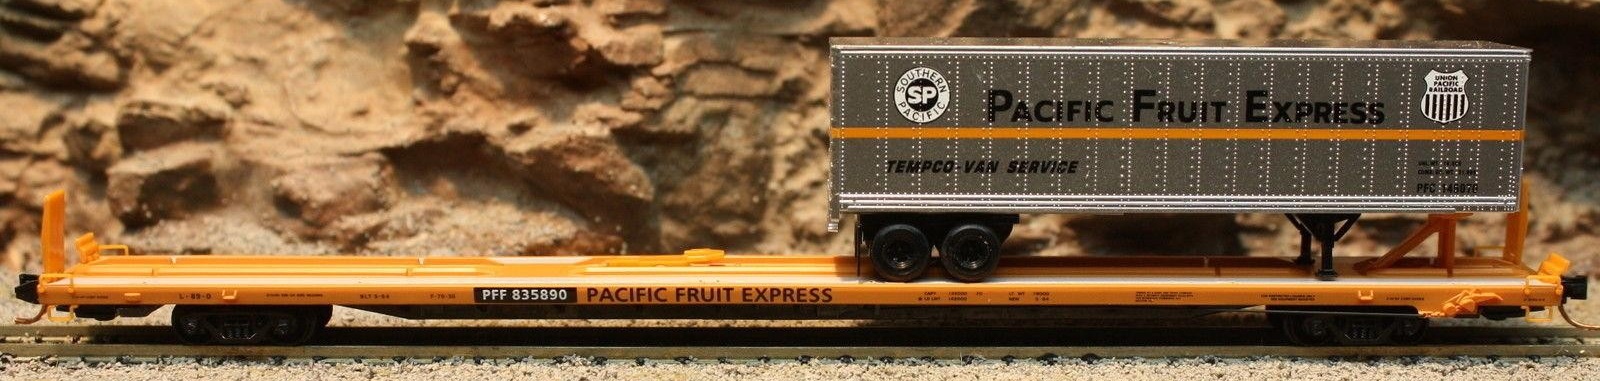 N Scale - Micro-Trains - 071 52 100 - Flatcar, 89 Foot, TOFC - Pacific Fruit Express - 835890